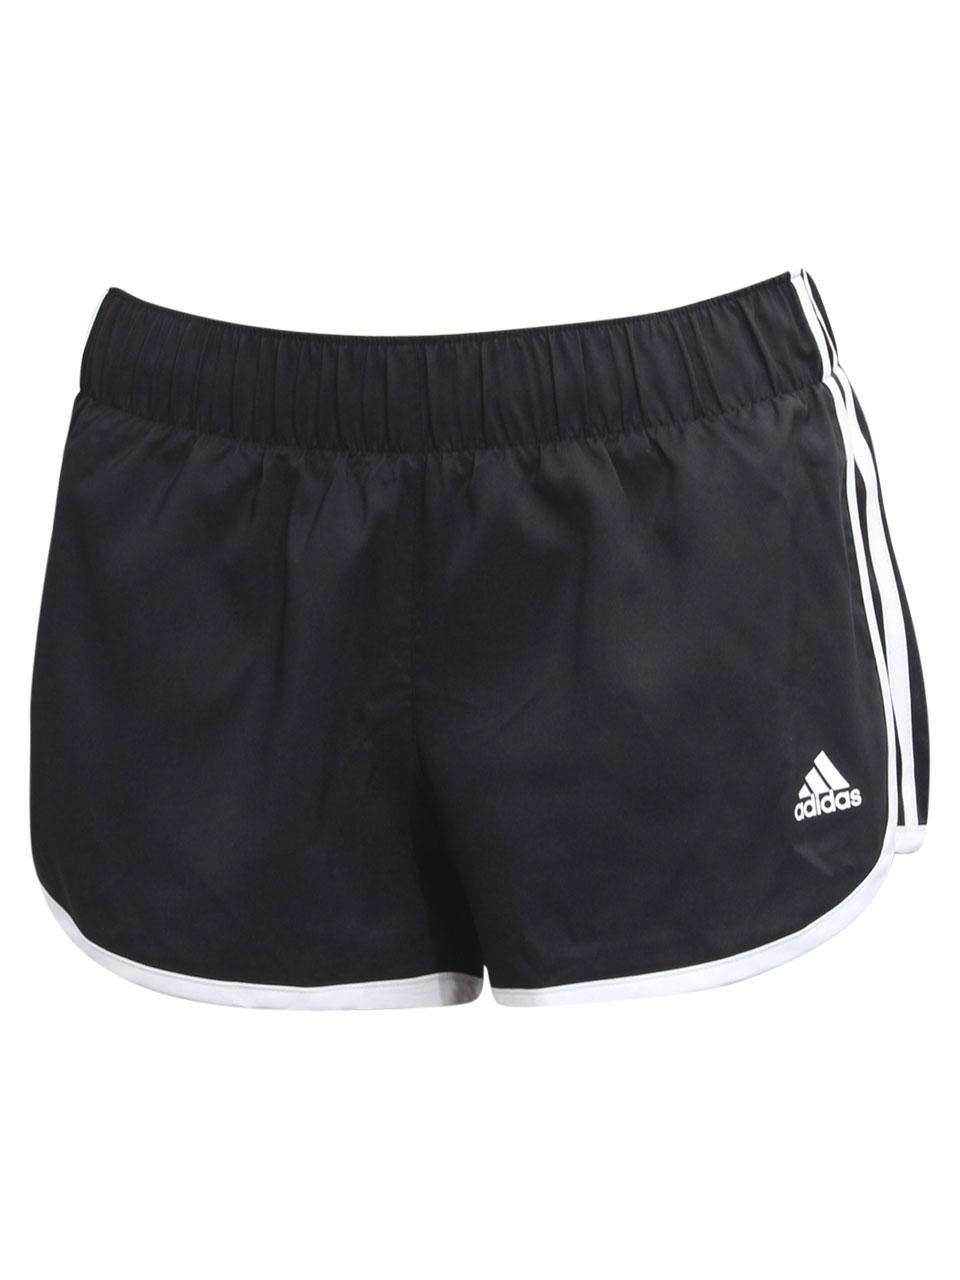 M10 Woven Slim Fit Climalite Shorts